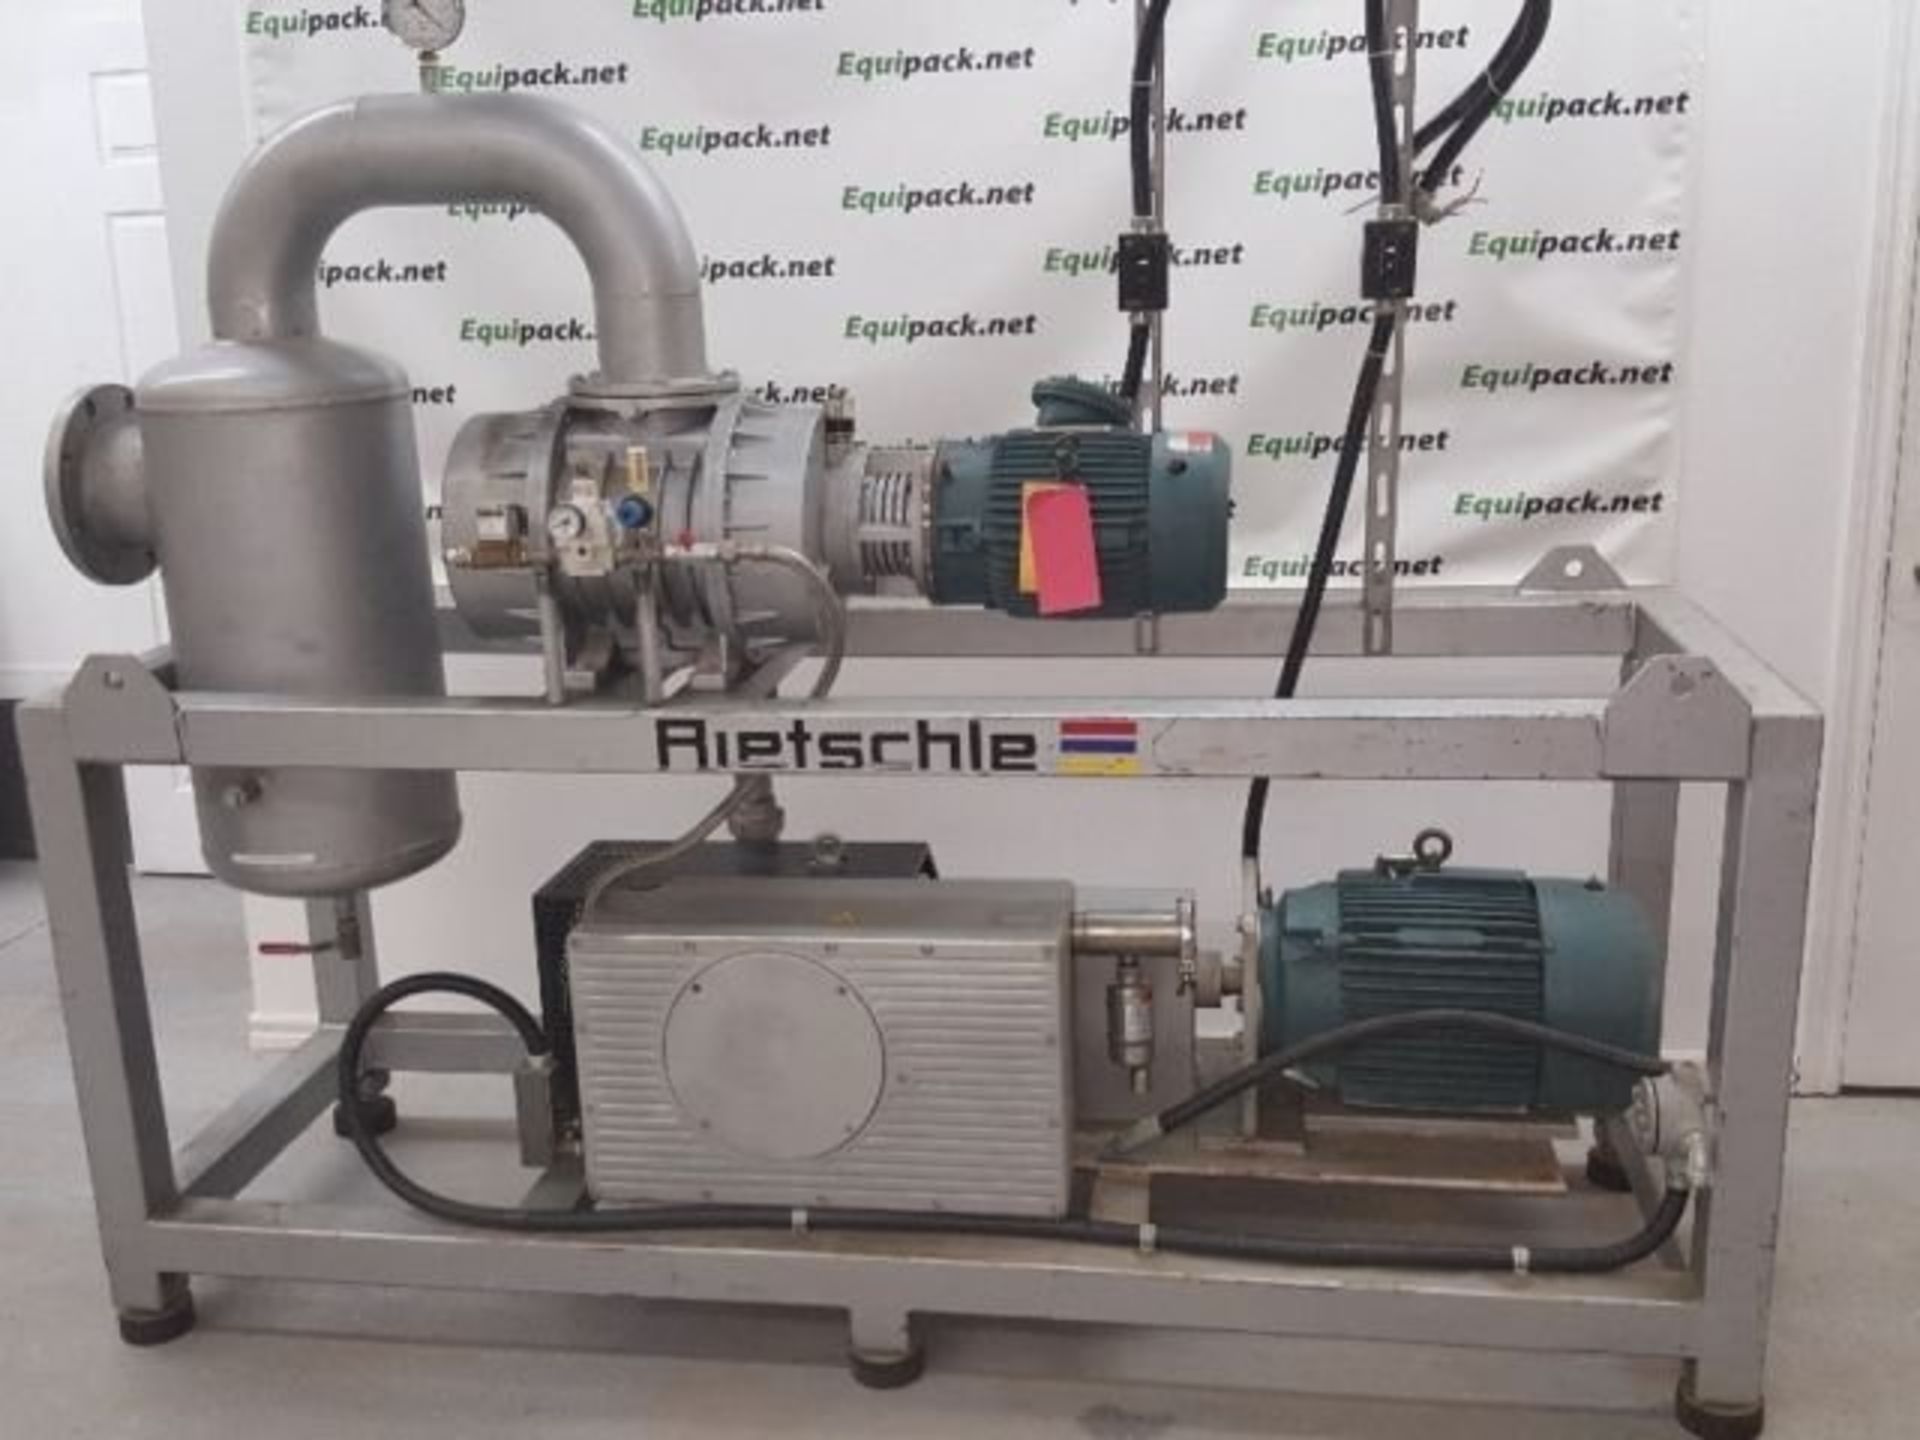 Rietschle Vacuum System modele VC300 01, 02567-0113 TYPE 1000 575volts / 5.20 / 3PH /60Hz 1 / SF 1,